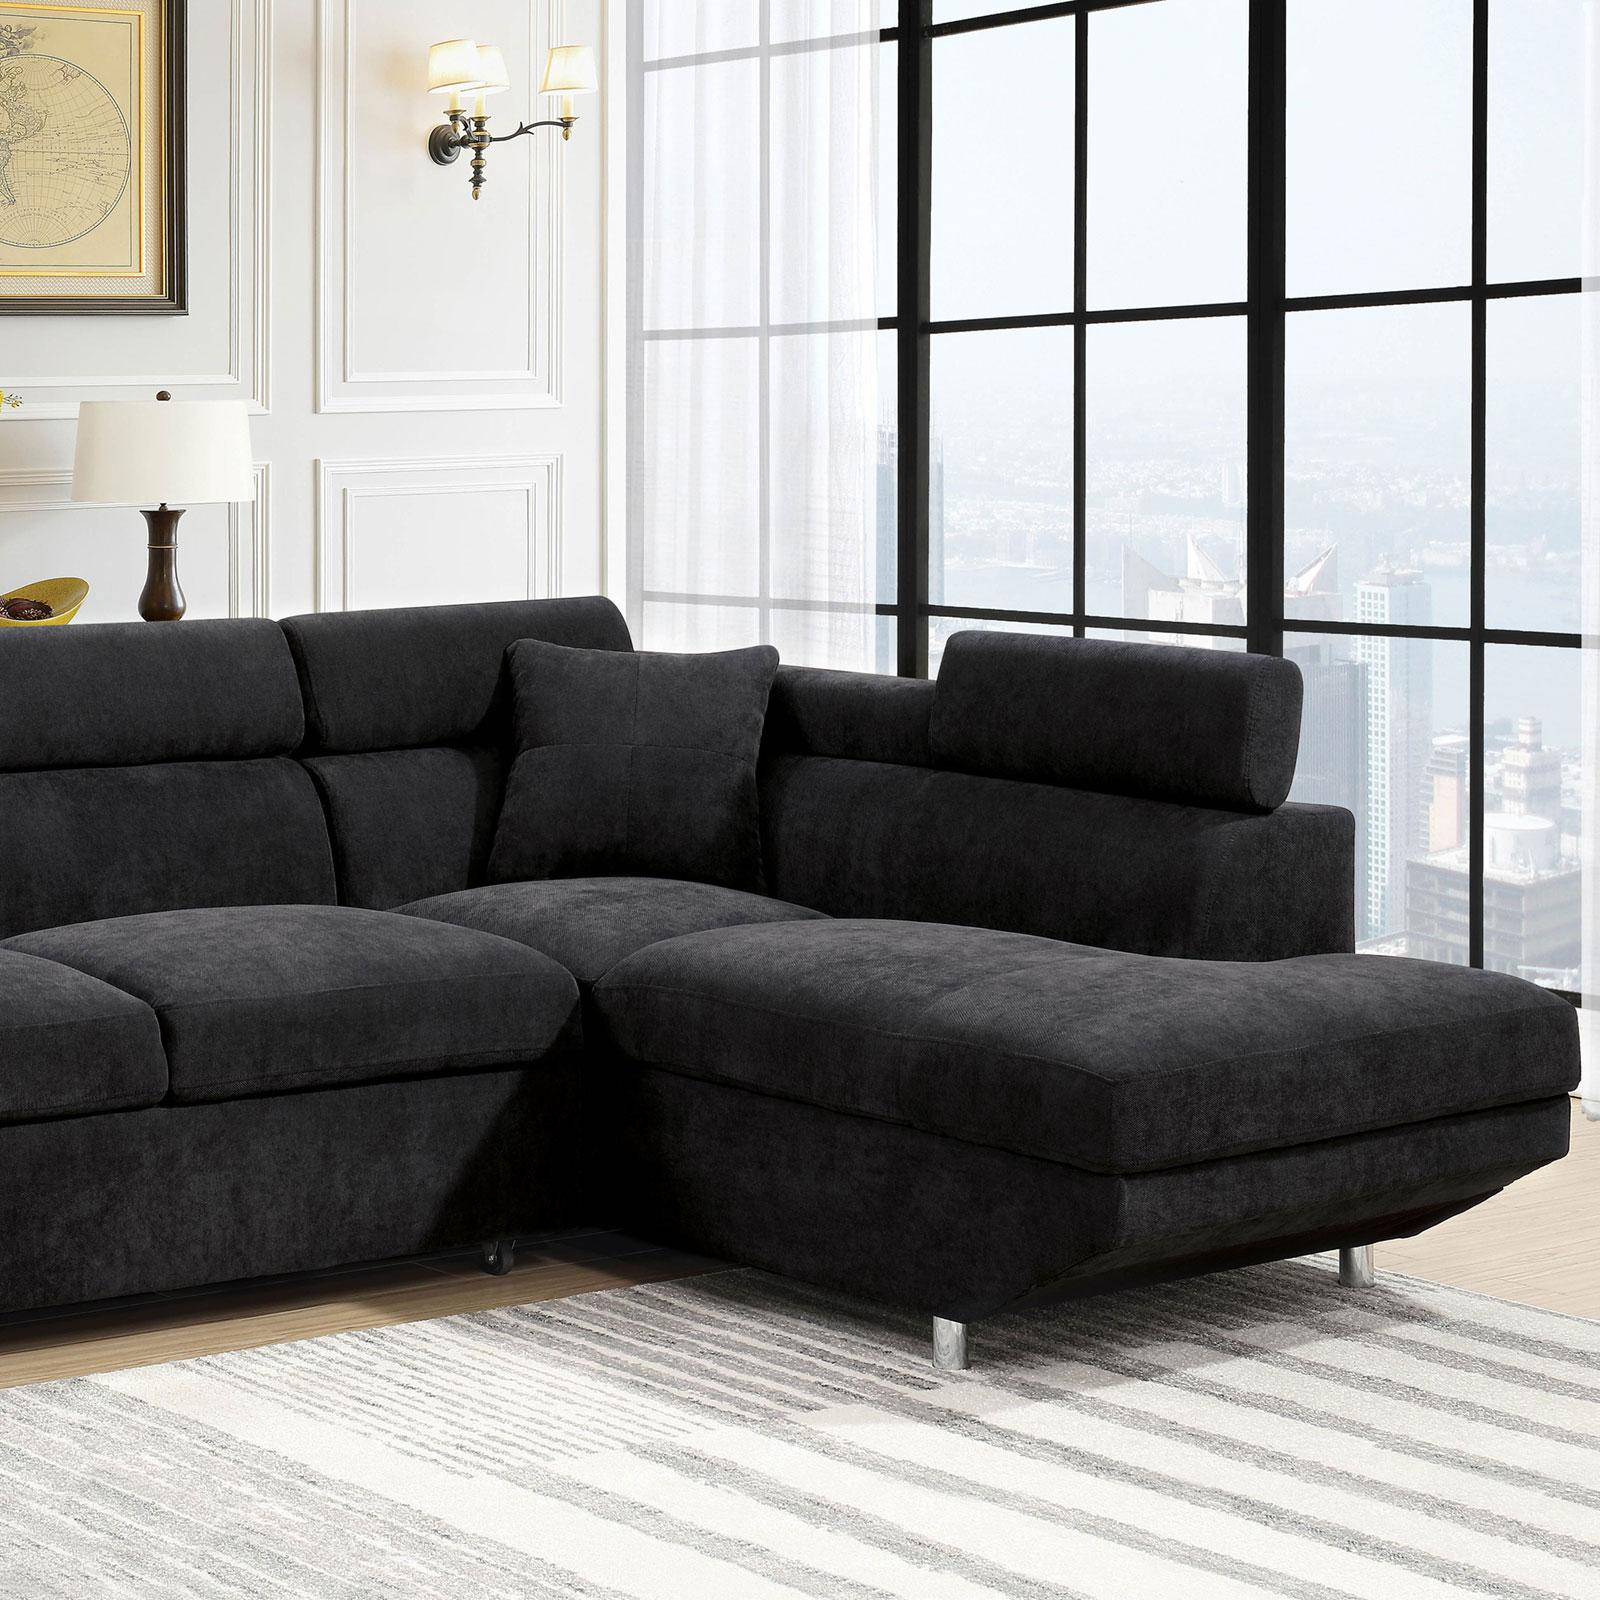 Contemporary Sectional Sofa Bed FOREMAN CM6124 CM6124 in Black Fabric